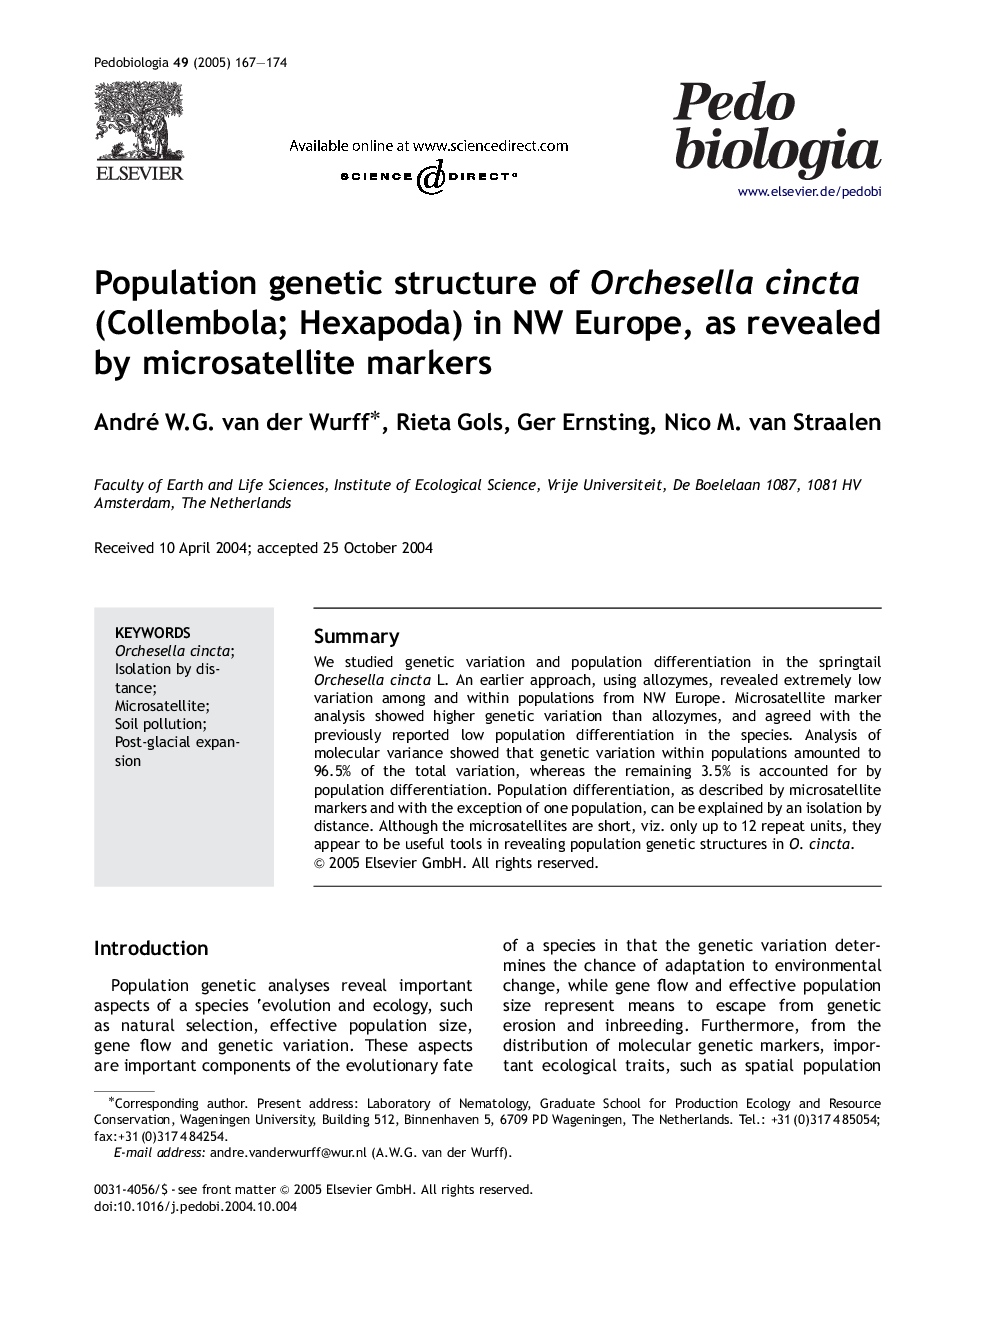 Population genetic structure of Orchesella cincta (Collembola; Hexapoda) in NW Europe, as revealed by microsatellite markers